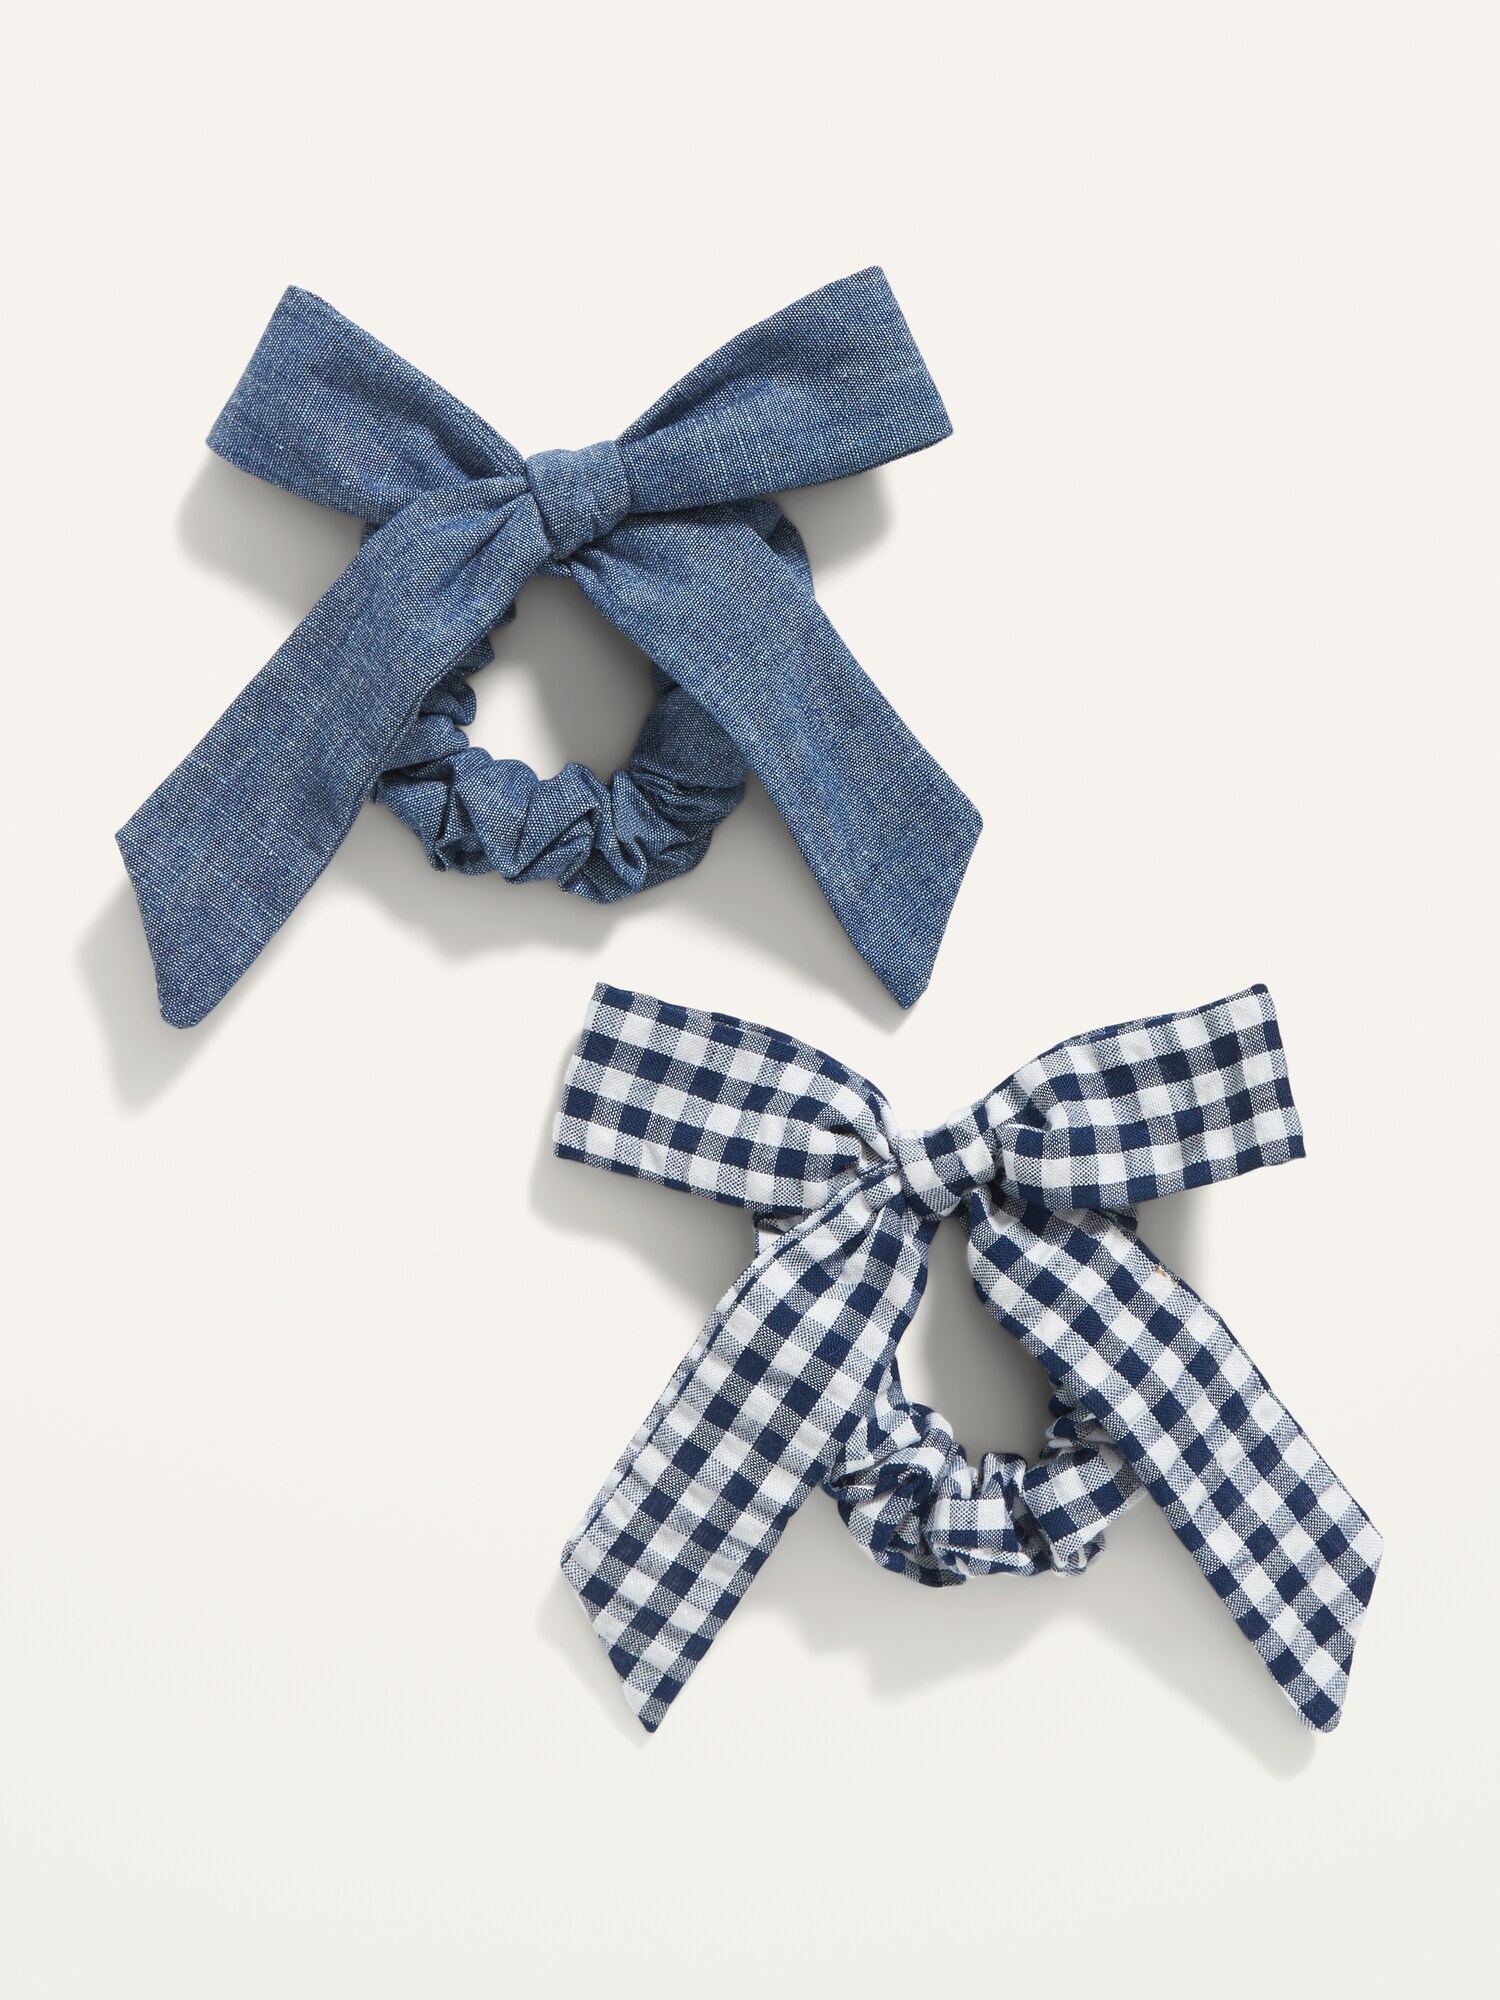 Old Navy Ribbon Bow Hair Tie 2-Pack for Women blue. 1